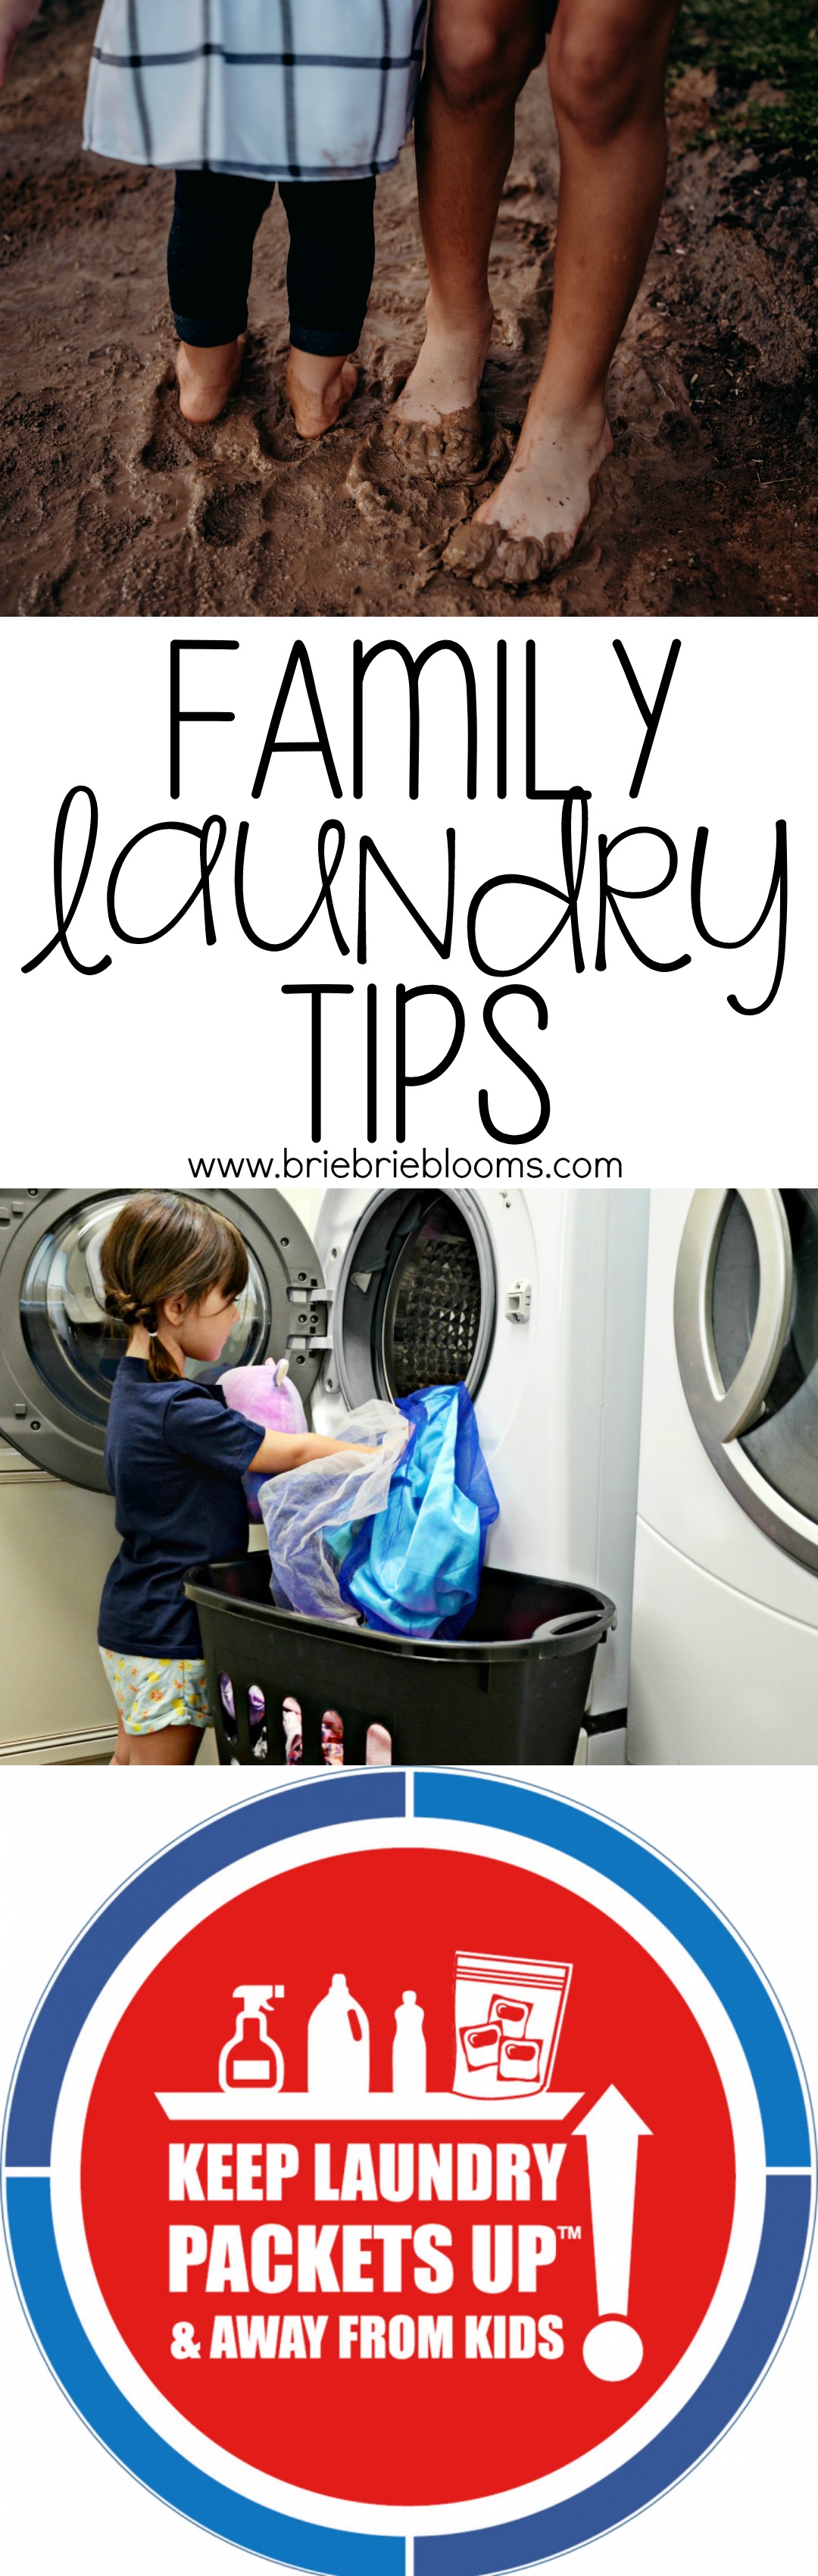 Join the American Cleaning Institute to see how toddlers view the world and learn why it's important to keep your #PacketsUp with these family laundry tips.